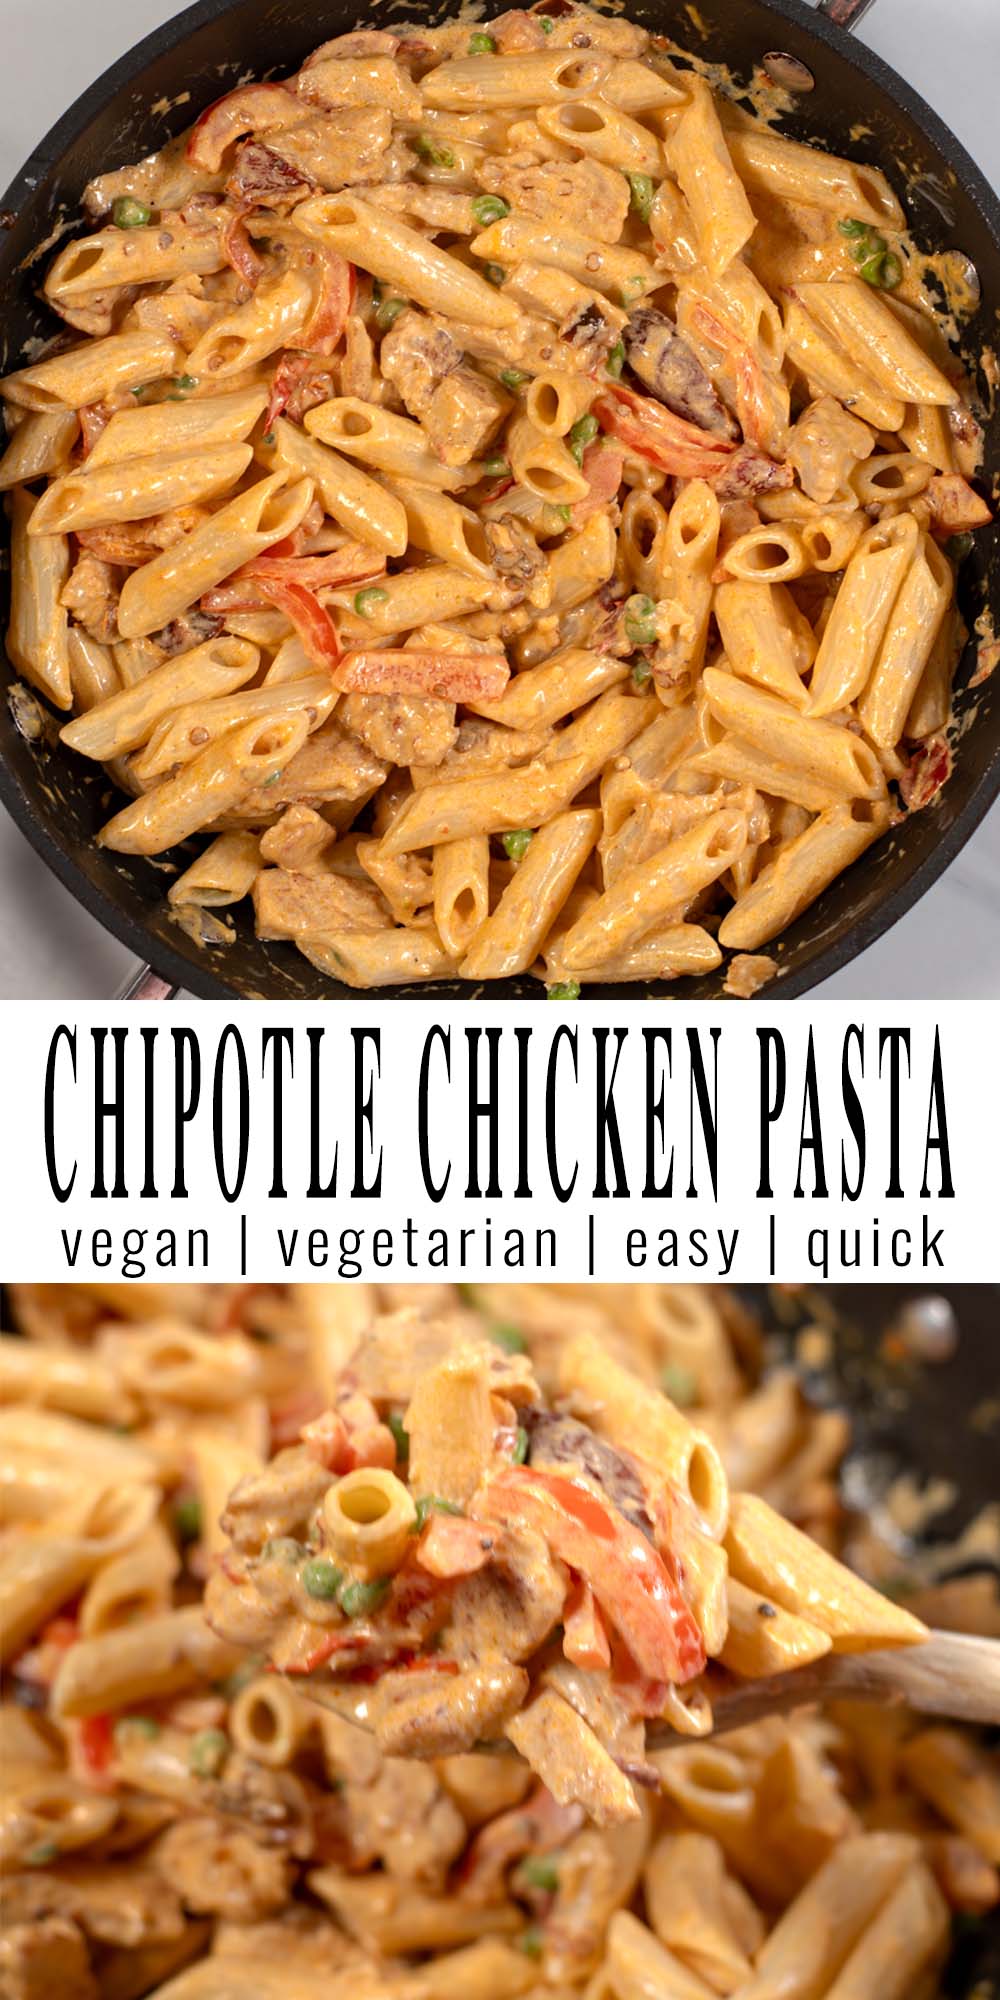 Collage of two photos of Chicken Chipotle Pasta with recipe title.